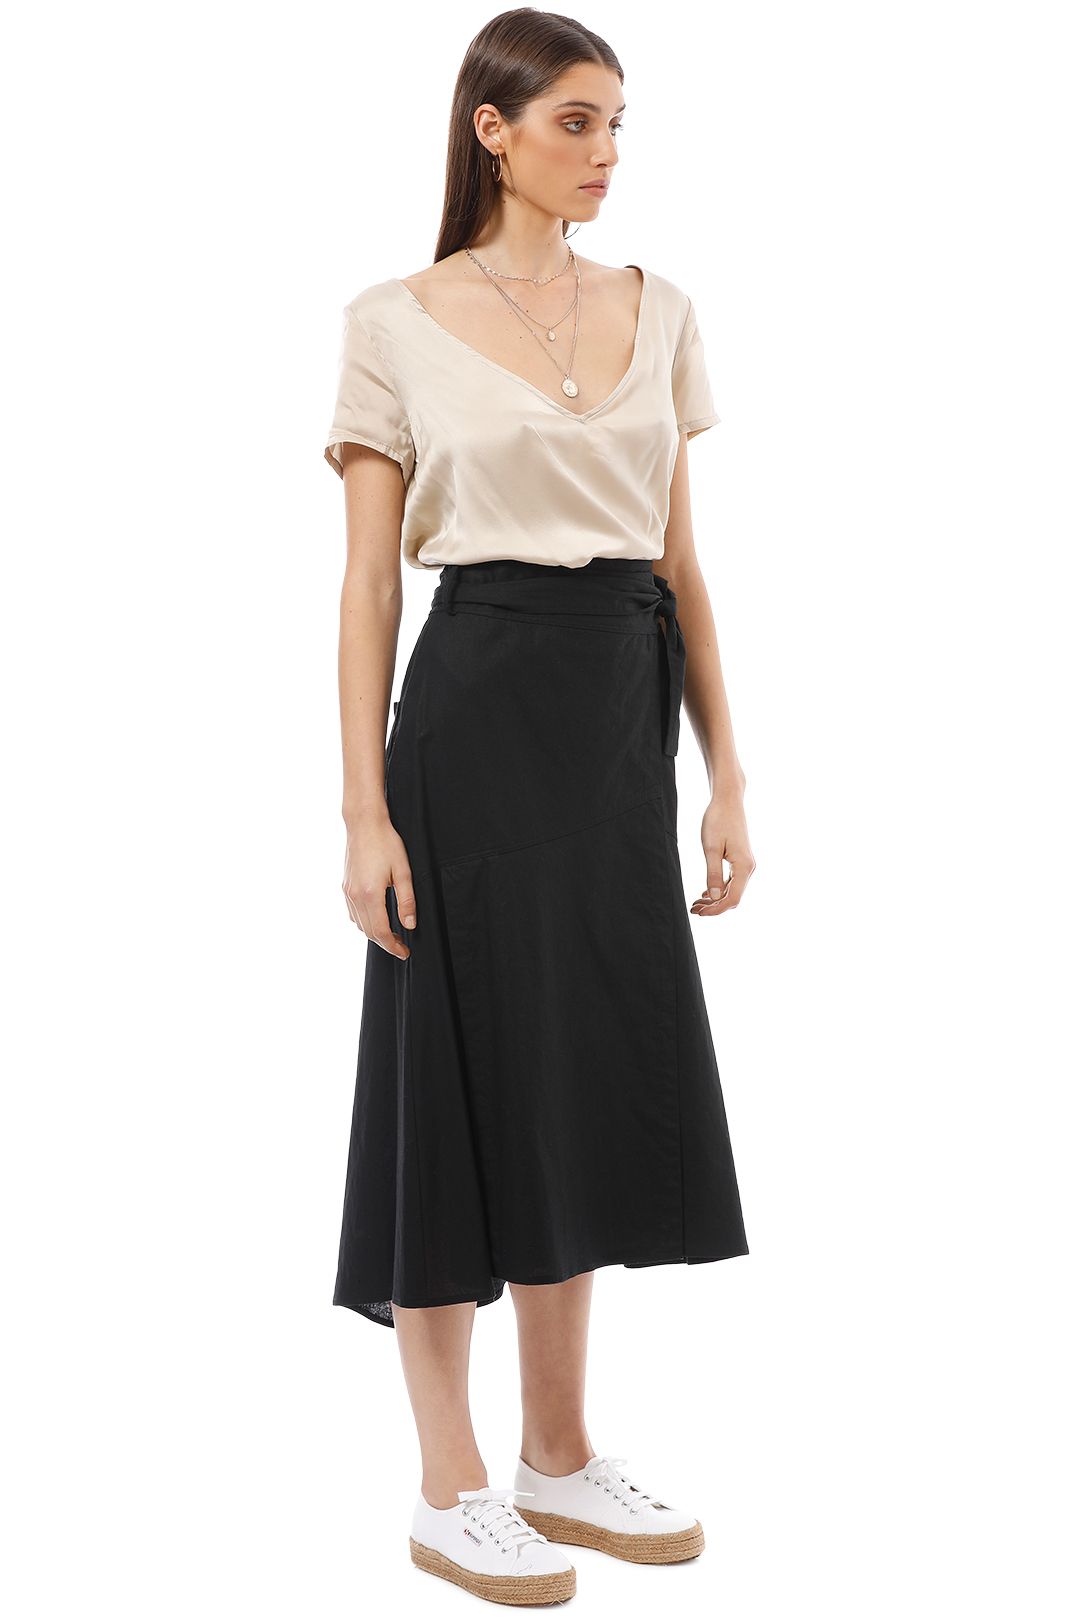 AKIN by Ginger and Smart - Grace Wrap Skirt - Black - Side